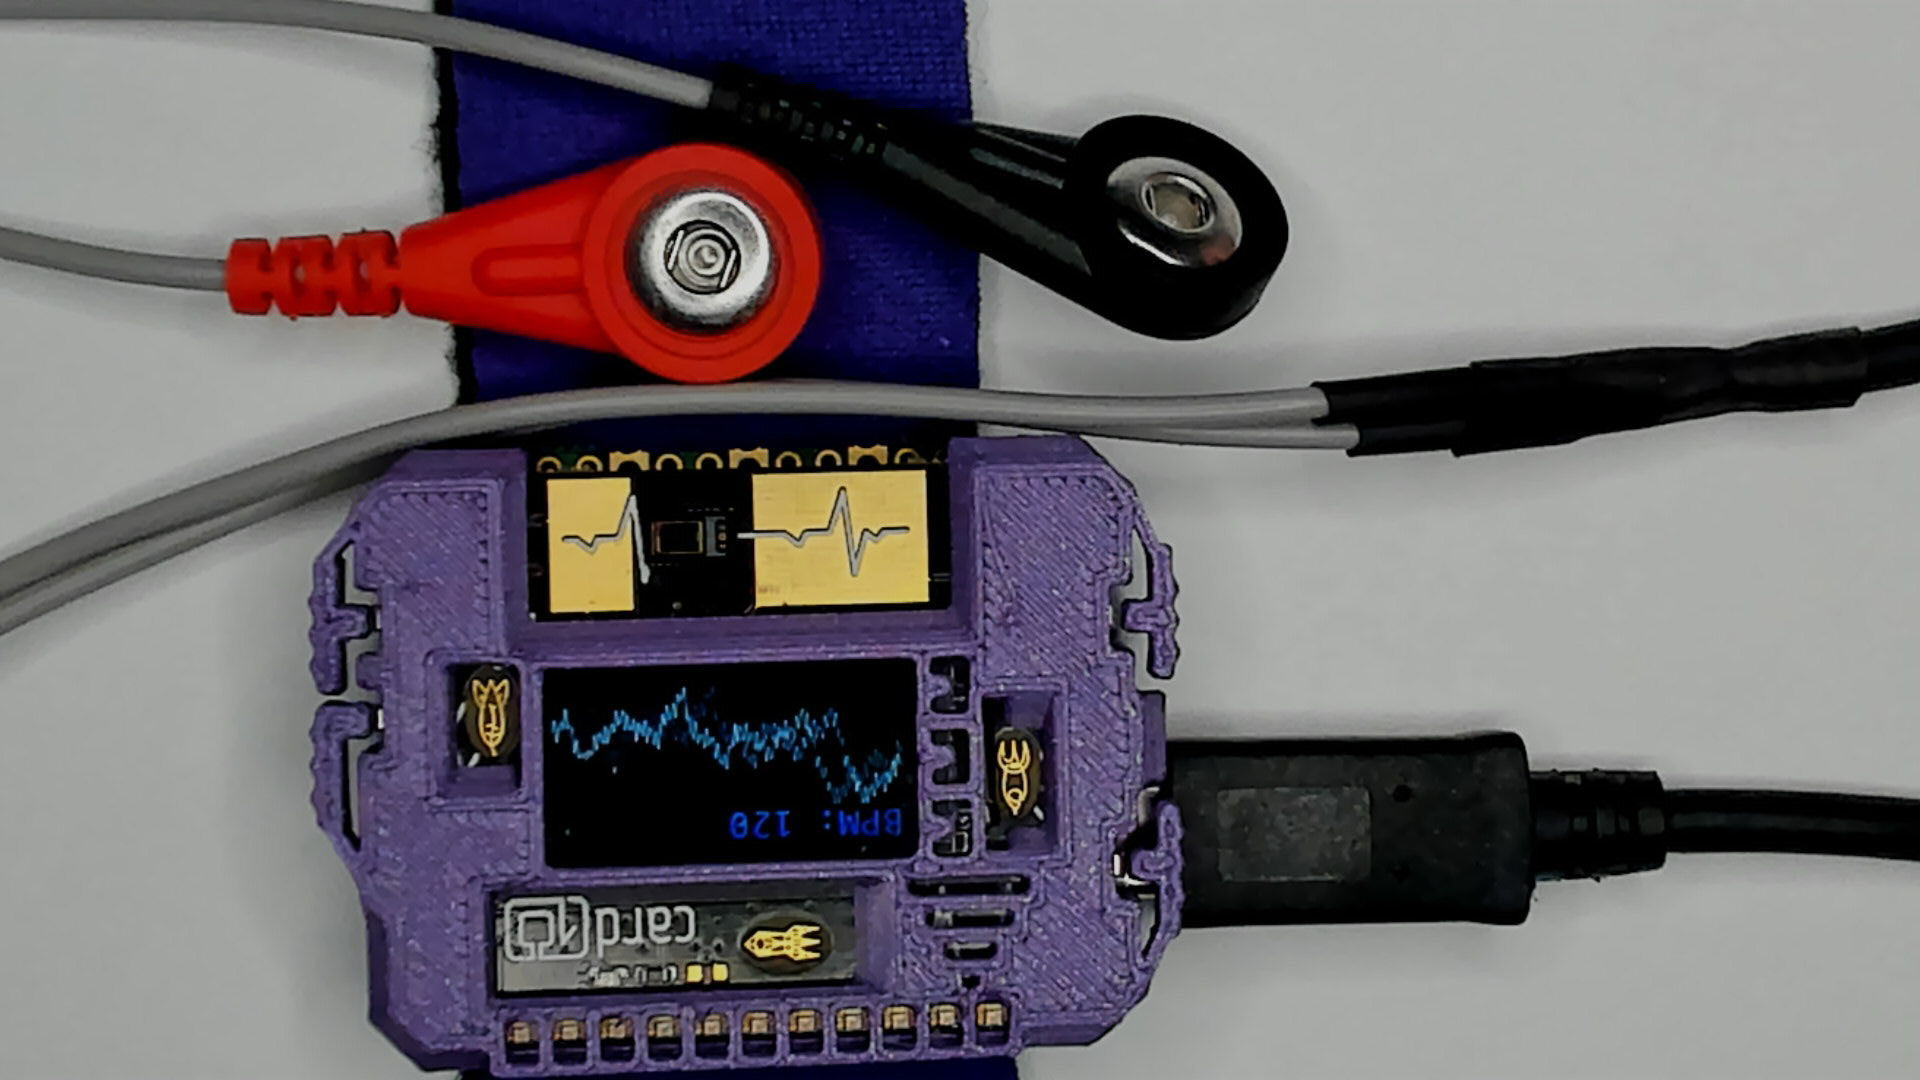 ECG usage with a USB cable